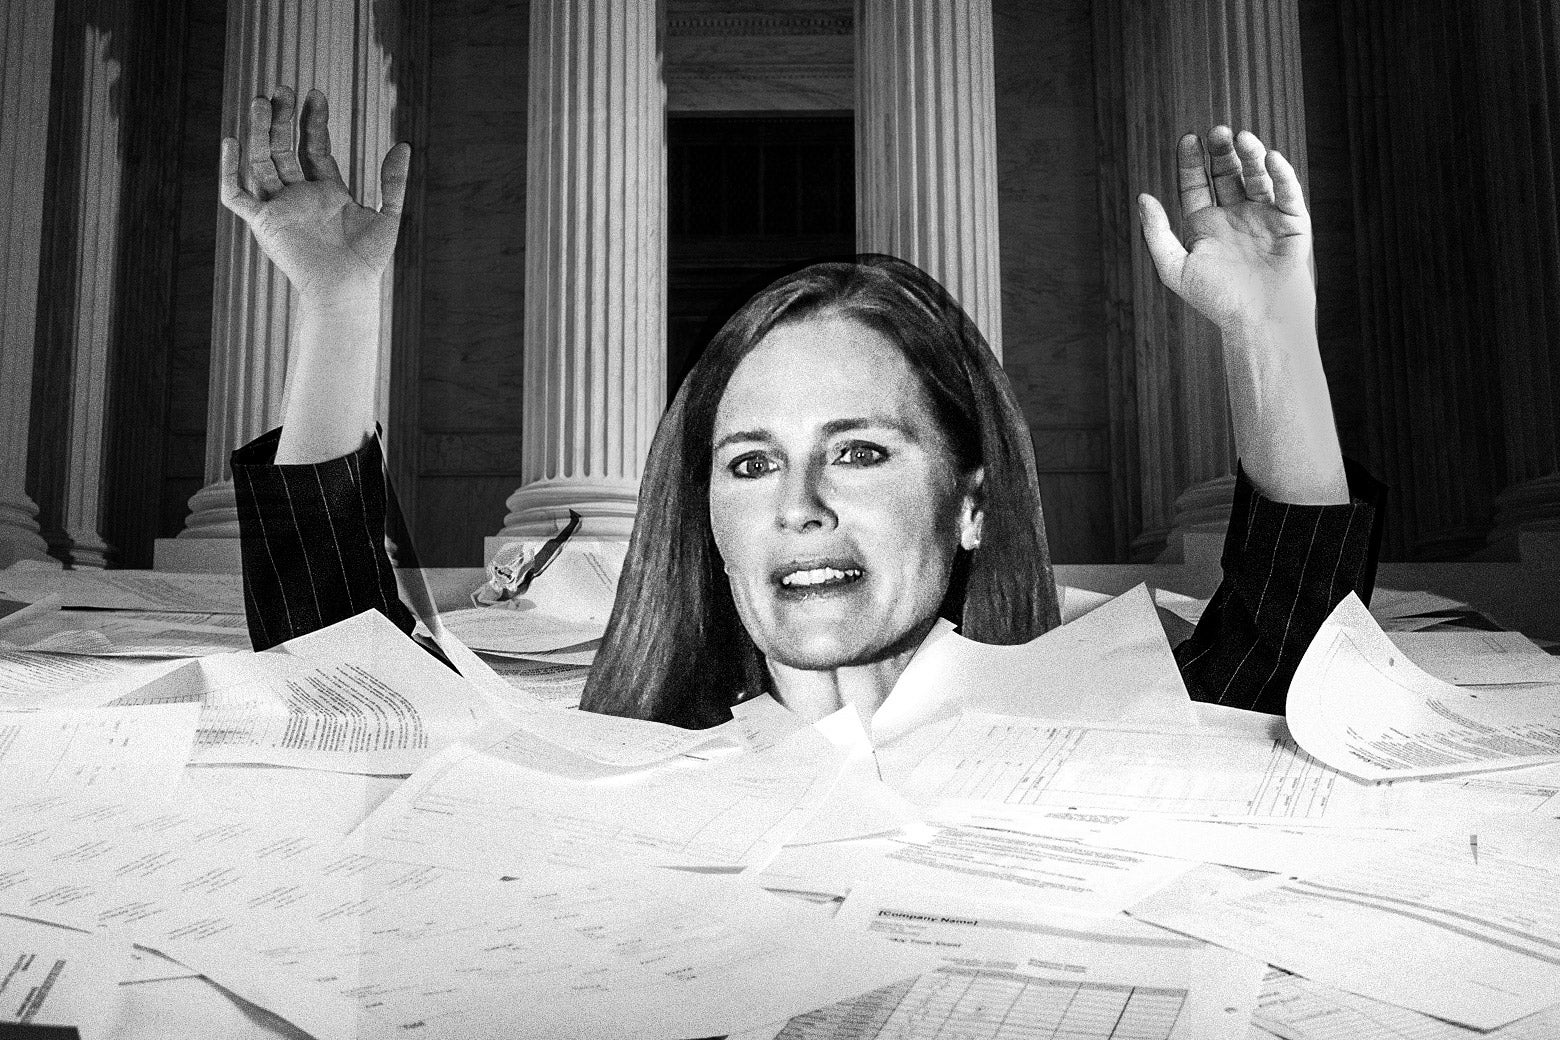 Amy Comey Barrett drowning in a sea of documents.